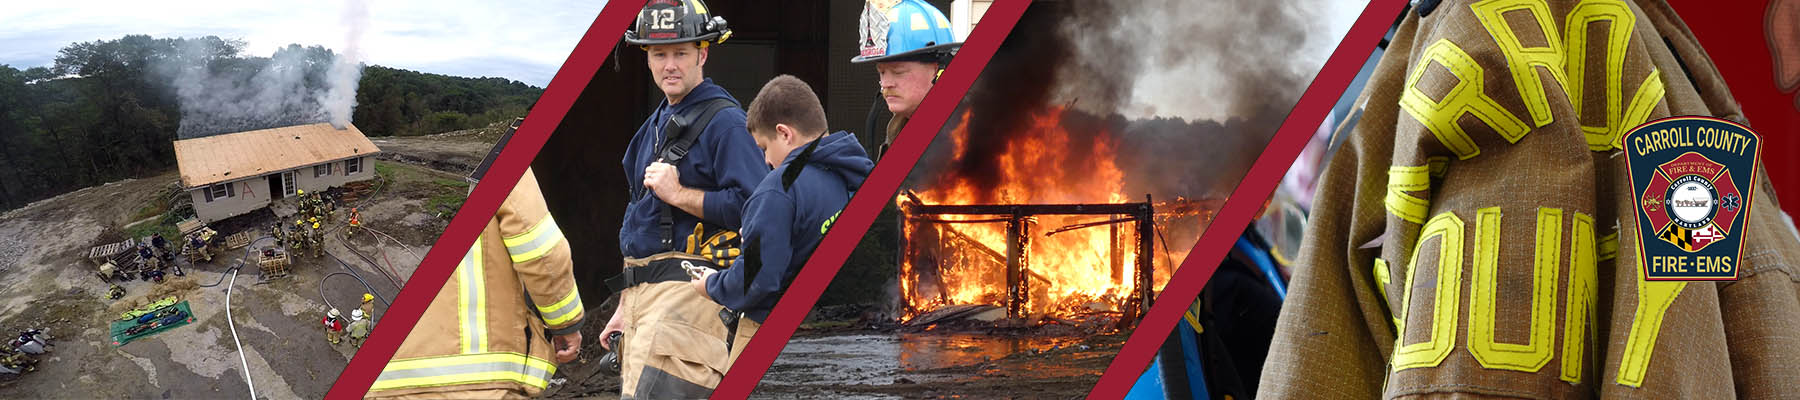 Standard Operating Procedures for Carroll County Fire and EMS